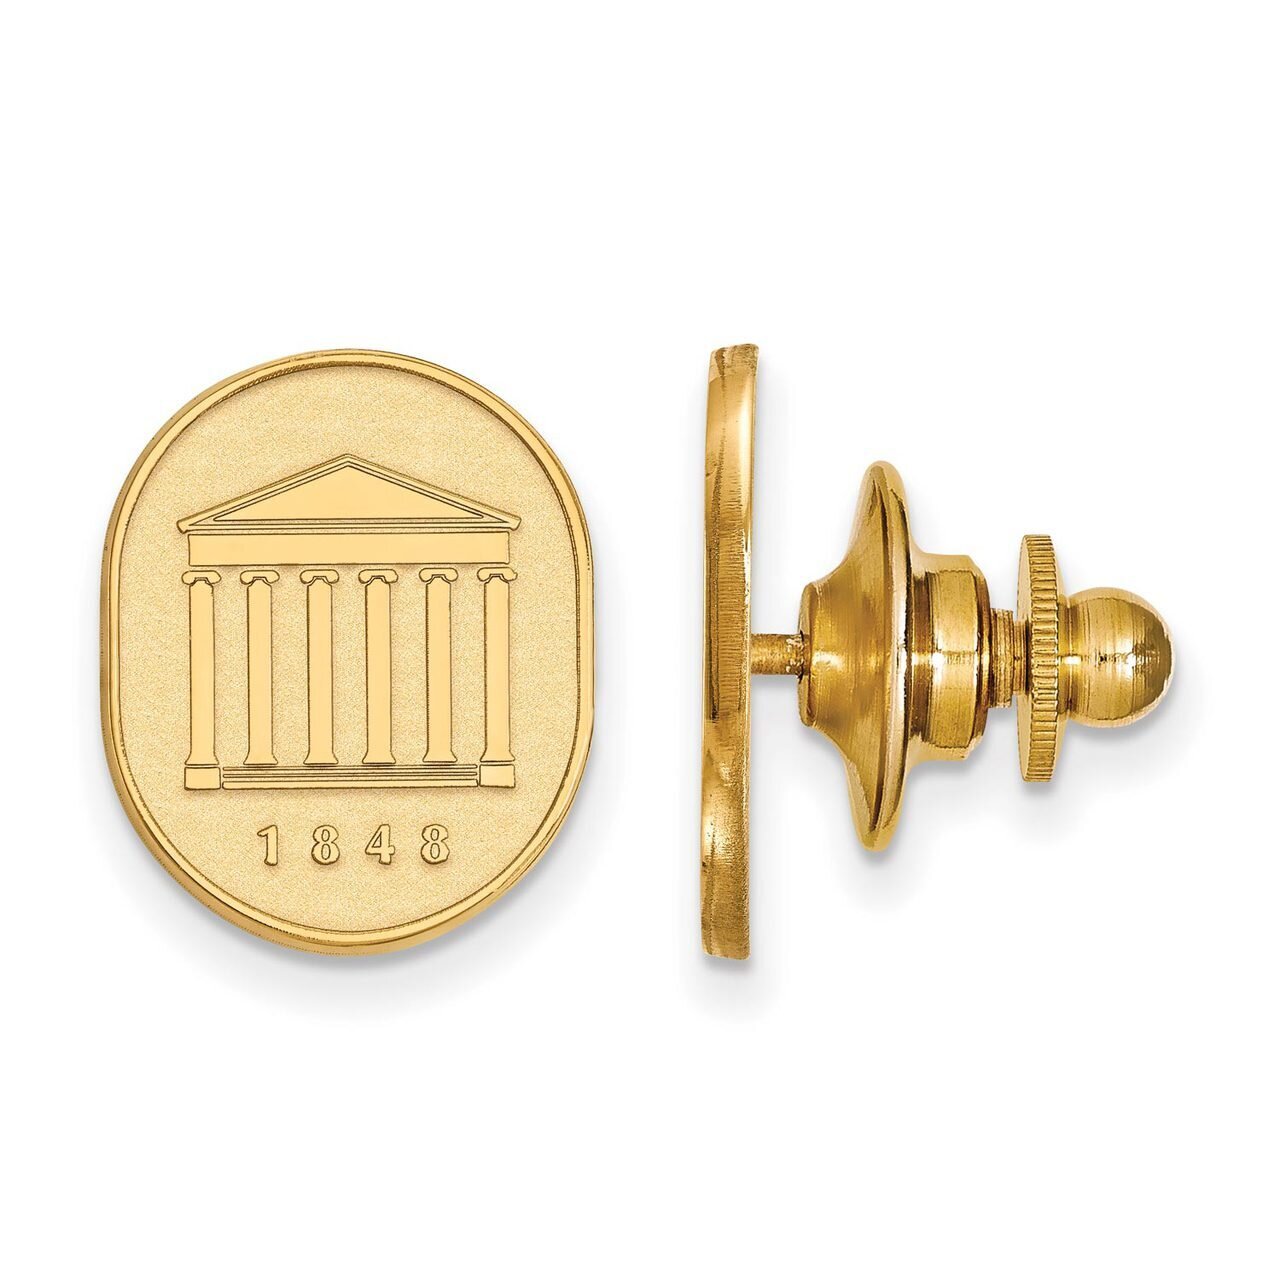 University of Missisippi Crest Lapel Pin Gold-plated Silver GP072UMS